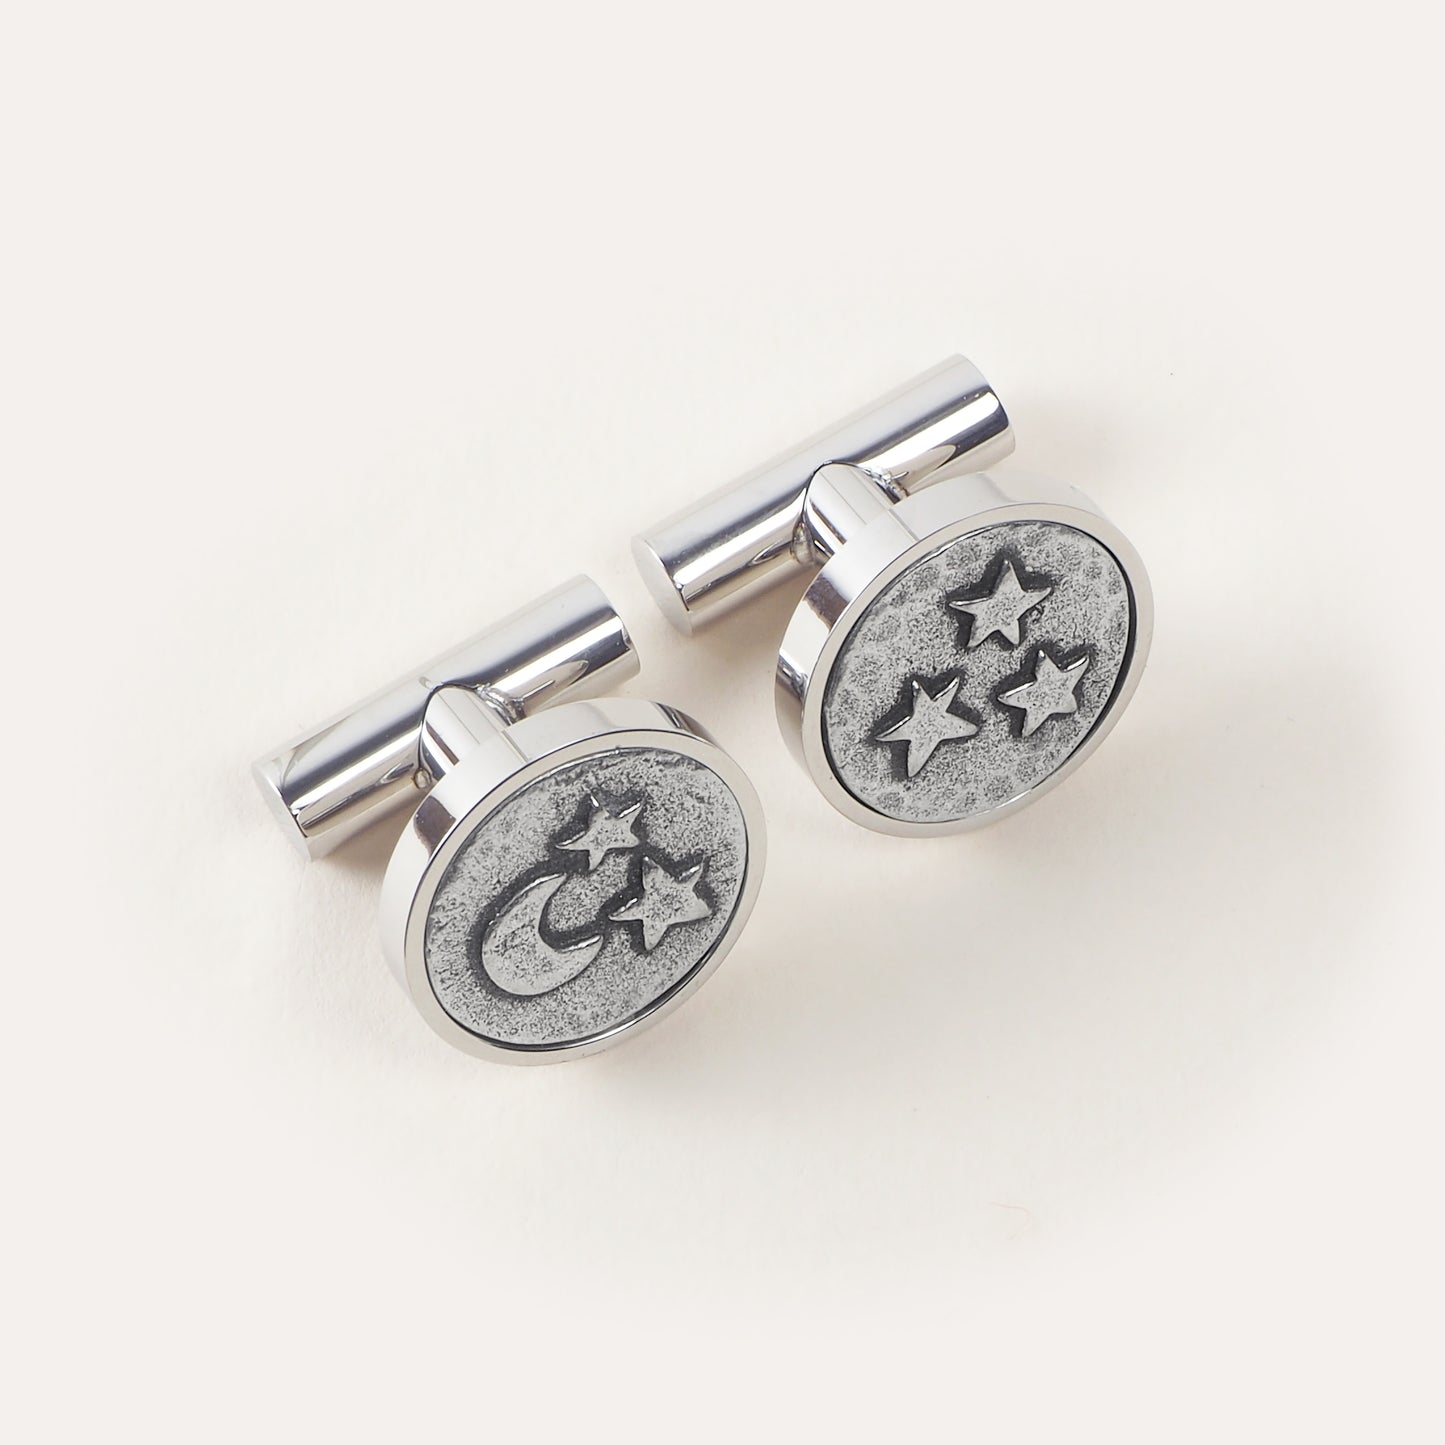 'Love You to the Moon and Back' Cufflinks